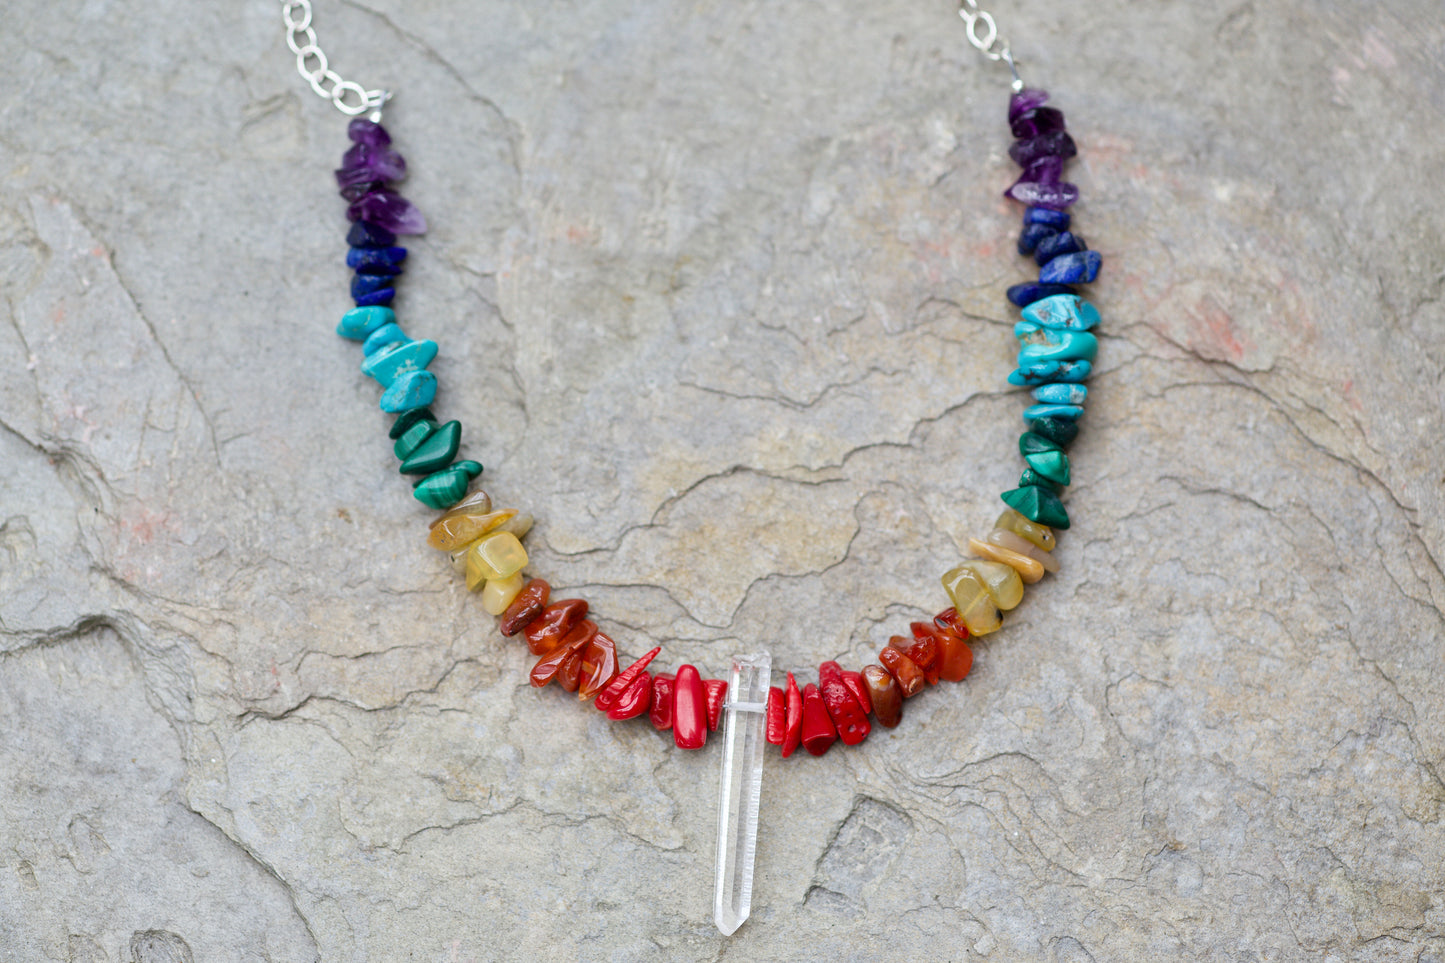 Rainbow / Pride / Chakra Stones, Clear Quartz Dow Crystal, and Sterling Silver Adjustable Length Necklace